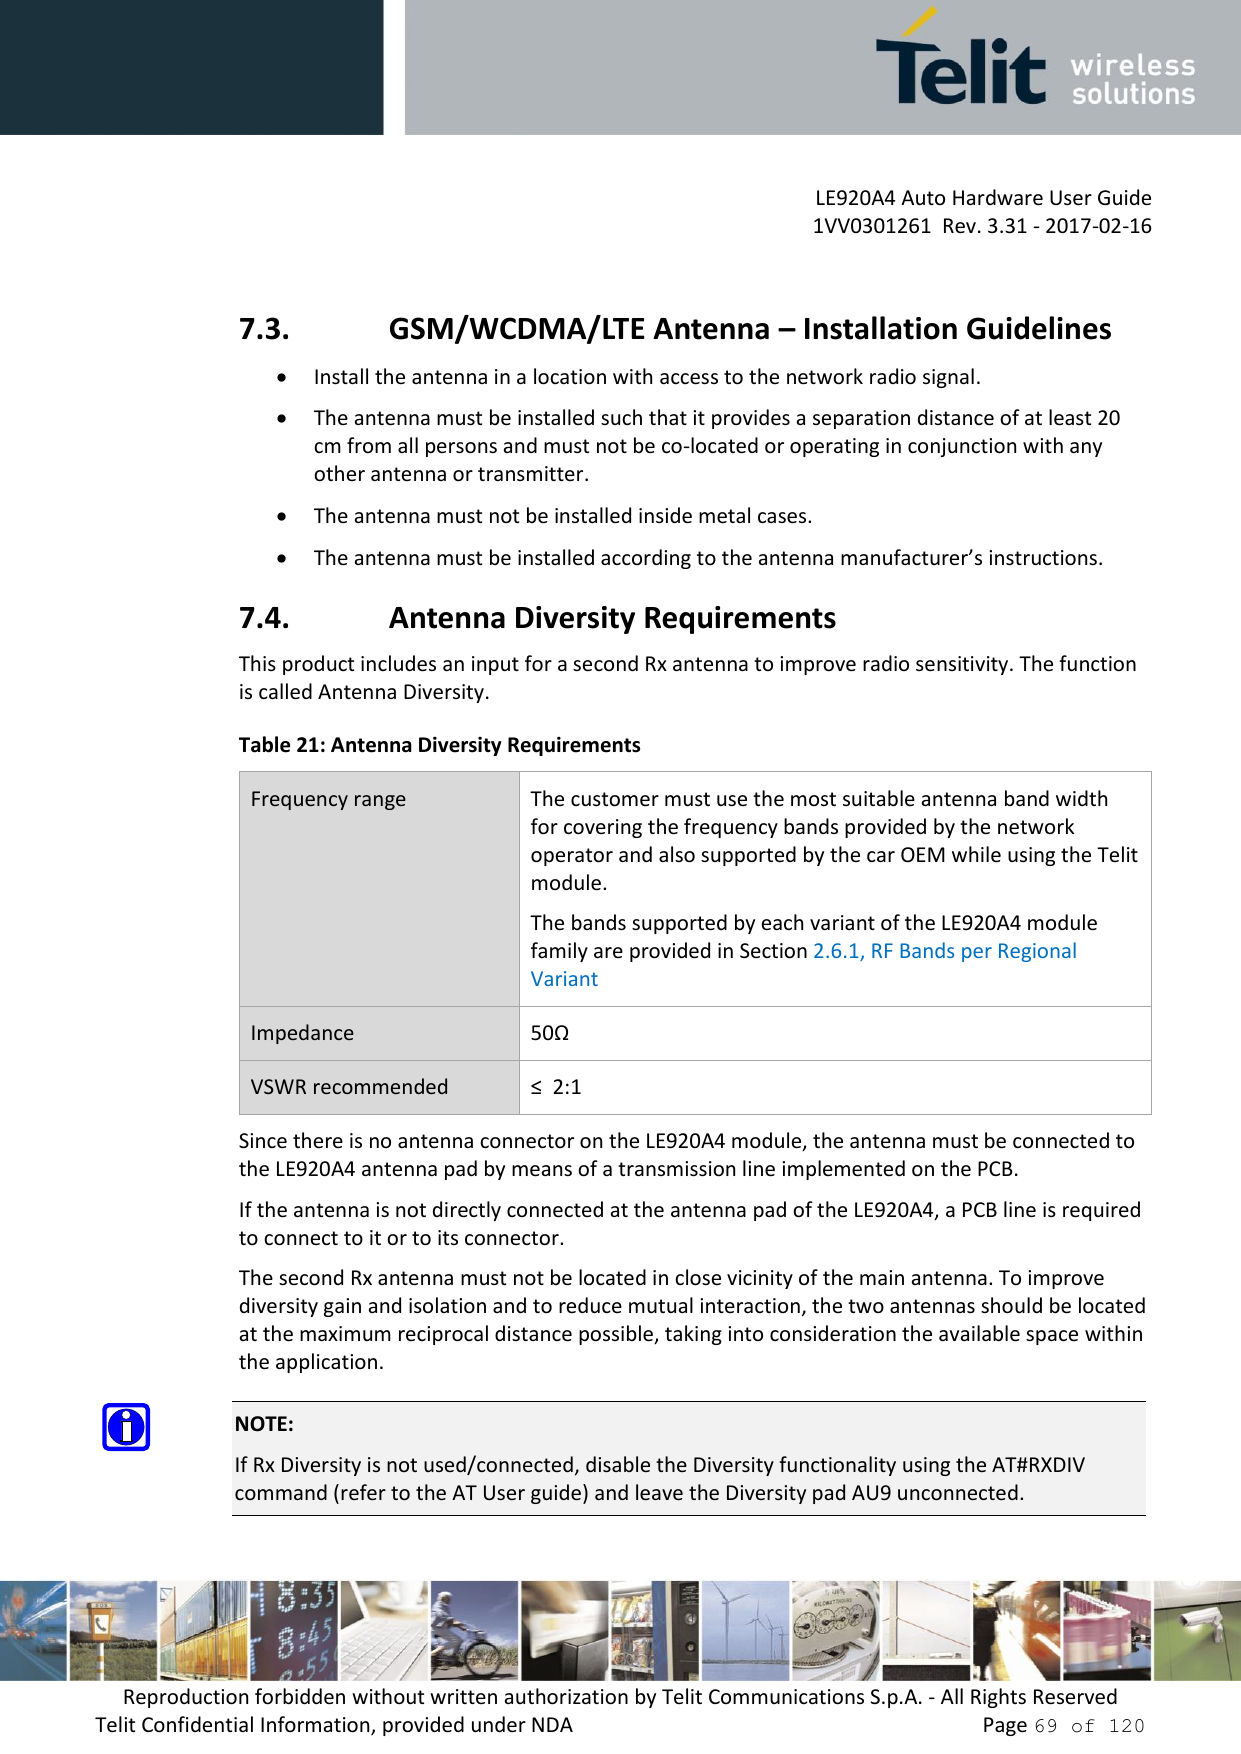         LE920A4 Auto Hardware User Guide     1VV0301261  Rev. 3.31 - 2017-02-16 Reproduction forbidden without written authorization by Telit Communications S.p.A. - All Rights Reserved Telit Confidential Information, provided under NDA                 Page 69 of 120  7.3. GSM/WCDMA/LTE Antenna – Installation Guidelines  Install the antenna in a location with access to the network radio signal.  The antenna must be installed such that it provides a separation distance of at least 20 cm from all persons and must not be co-located or operating in conjunction with any other antenna or transmitter.  The antenna must not be installed inside metal cases.   The antenna must be installed according to the antenna manufacturer’s instructions. 7.4. Antenna Diversity Requirements This product includes an input for a second Rx antenna to improve radio sensitivity. The function is called Antenna Diversity. Table 21: Antenna Diversity Requirements Frequency range The customer must use the most suitable antenna band width for covering the frequency bands provided by the network operator and also supported by the car OEM while using the Telit module.  The bands supported by each variant of the LE920A4 module family are provided in Section 2.6.1, RF Bands per Regional Variant Impedance 50Ω VSWR recommended ≤  2:1 Since there is no antenna connector on the LE920A4 module, the antenna must be connected to the LE920A4 antenna pad by means of a transmission line implemented on the PCB. If the antenna is not directly connected at the antenna pad of the LE920A4, a PCB line is required to connect to it or to its connector. The second Rx antenna must not be located in close vicinity of the main antenna. To improve diversity gain and isolation and to reduce mutual interaction, the two antennas should be located at the maximum reciprocal distance possible, taking into consideration the available space within the application.  NOTE: If Rx Diversity is not used/connected, disable the Diversity functionality using the AT#RXDIV command (refer to the AT User guide) and leave the Diversity pad AU9 unconnected. 